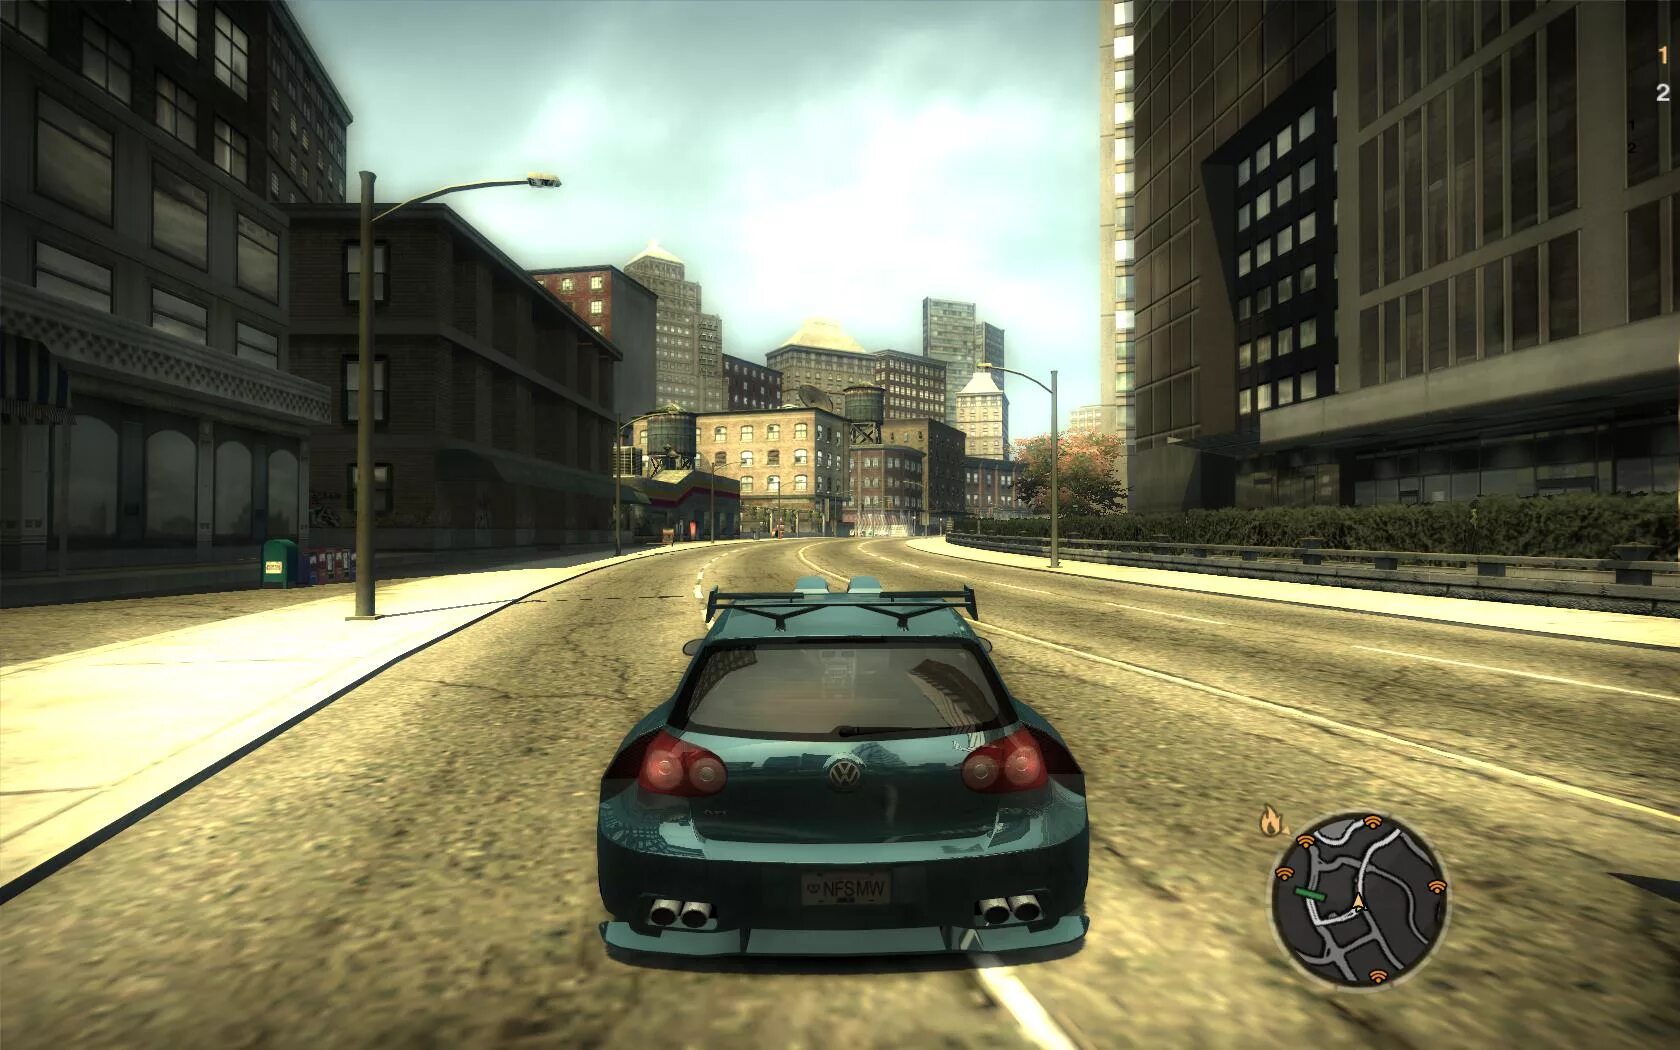 Games need speed most wanted. NFS most wanted 2005 геймплей. Most Water 2005. Гонки NFS most wanted 2005. NFS most wanted 2005 мост.